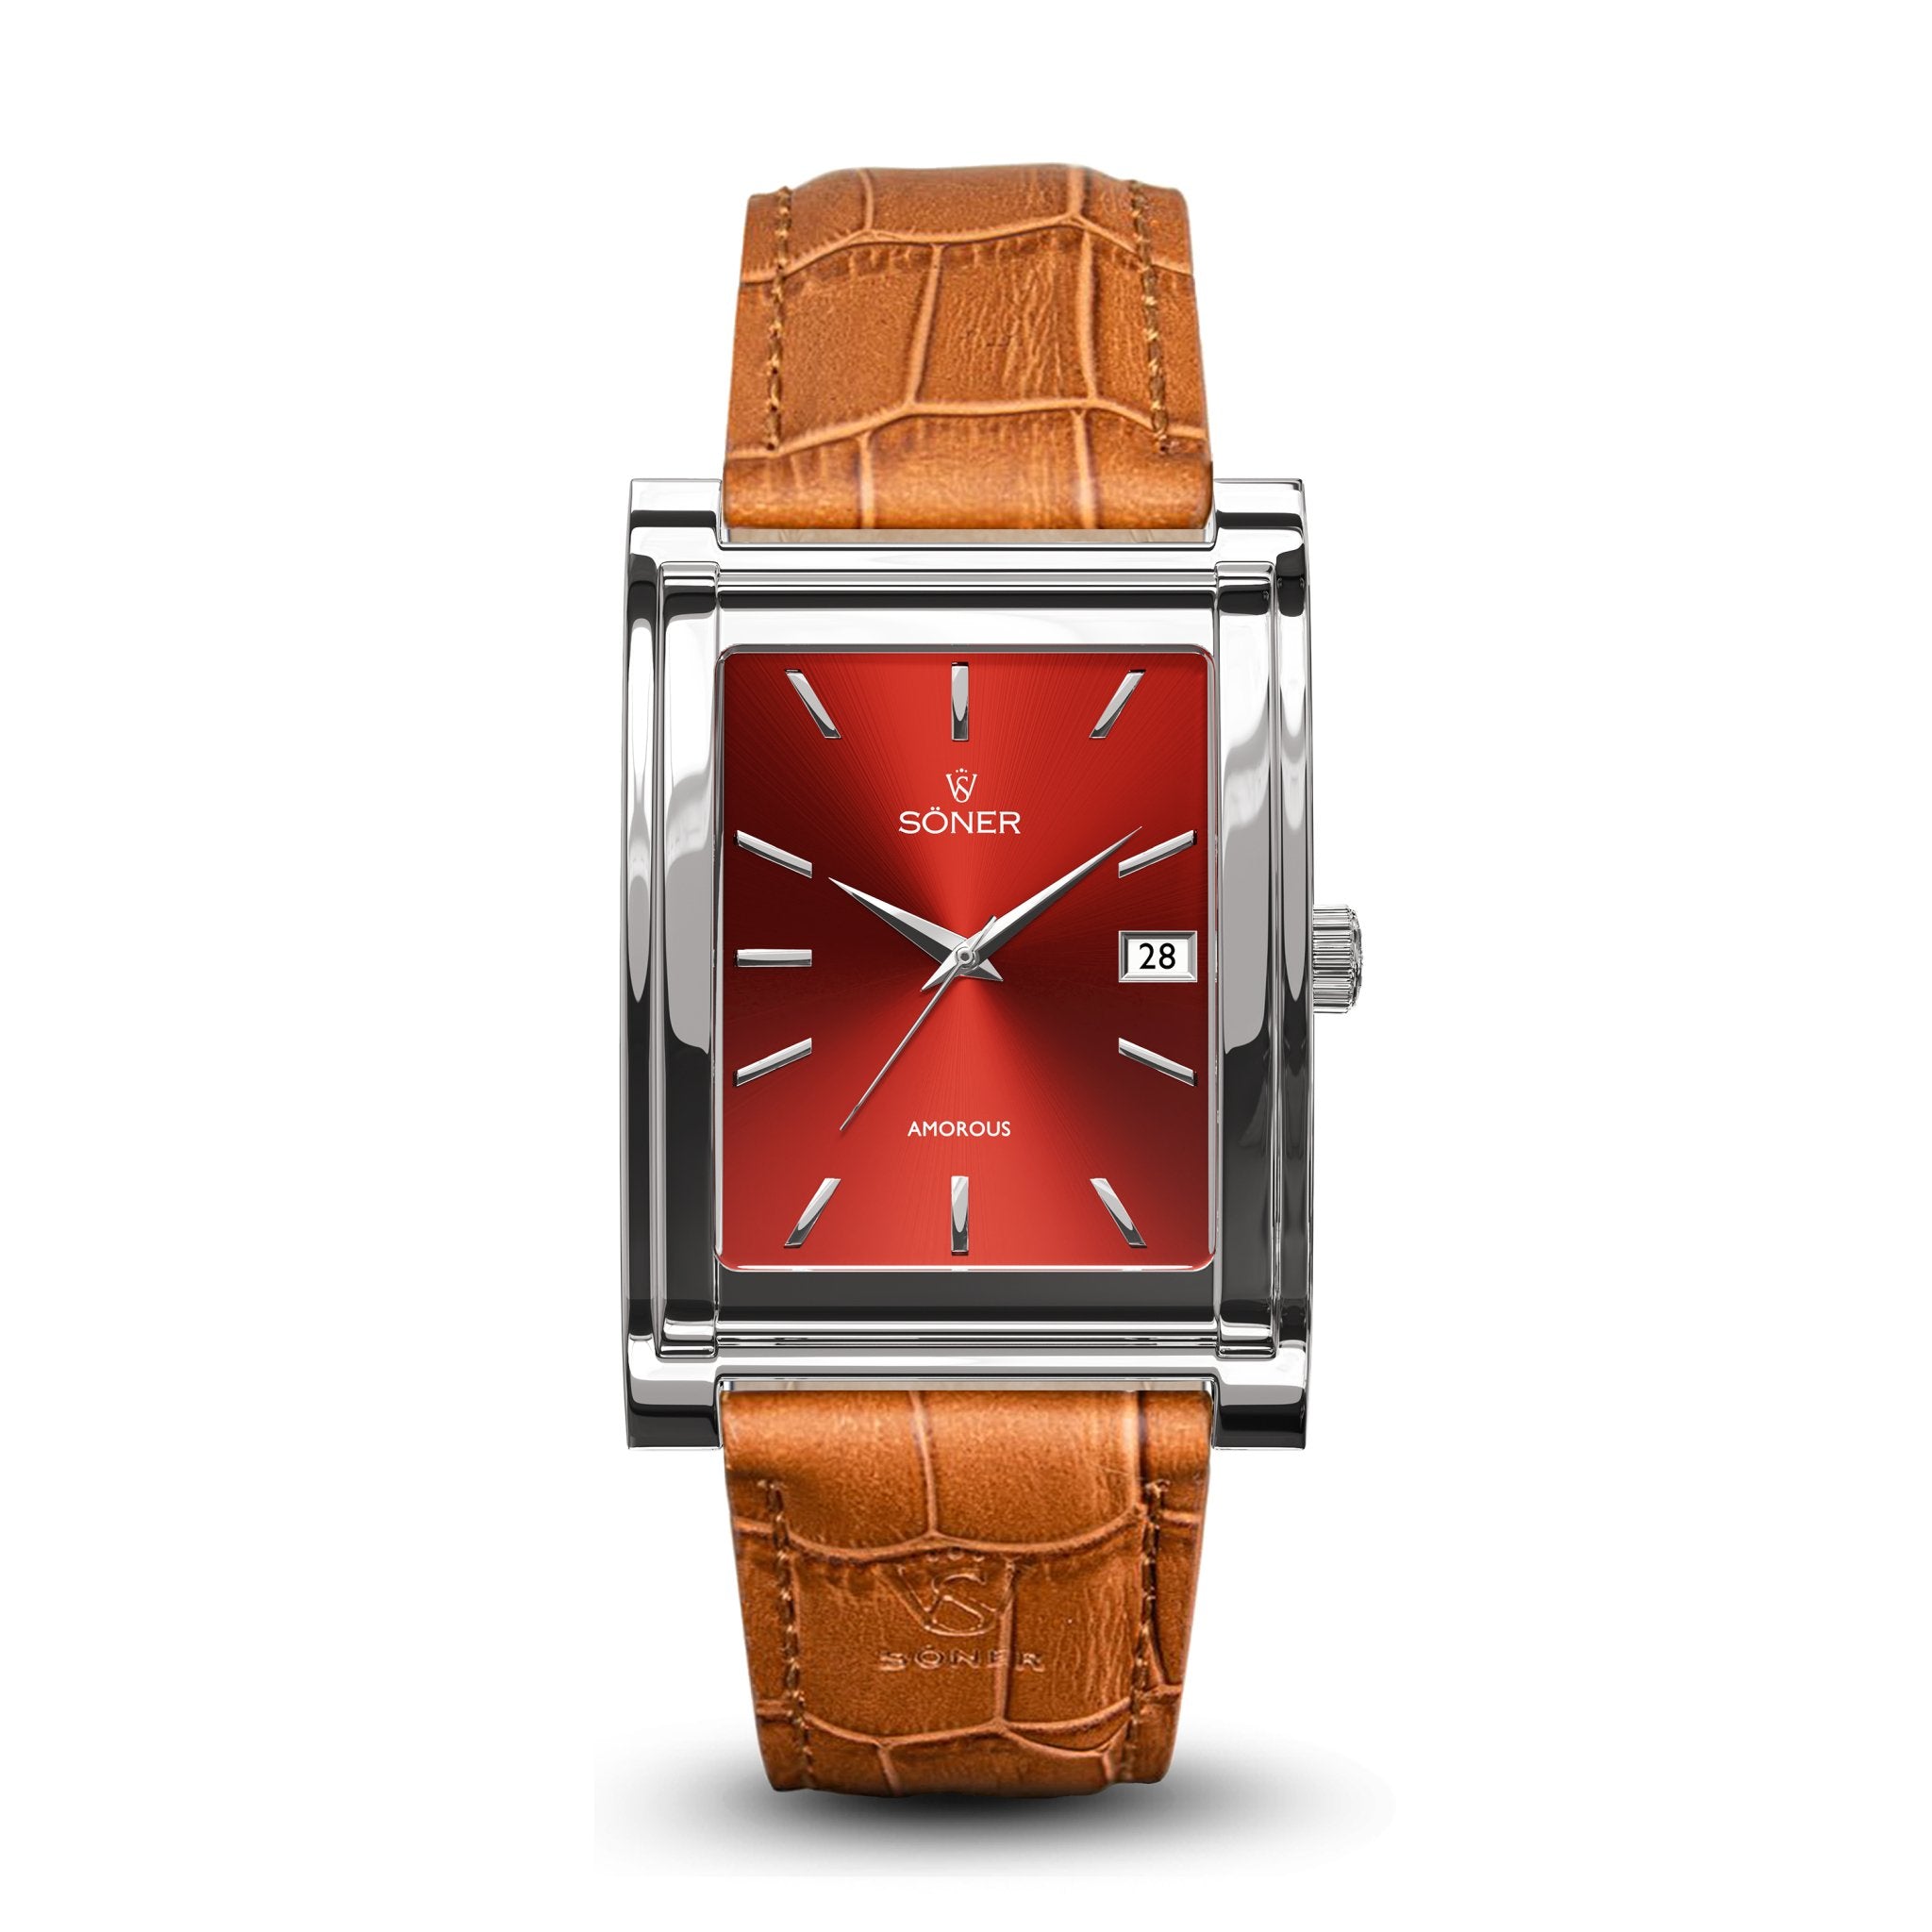 Square automatic watch, Amorous Rio with red dial - light brown alligator pattern leather strap front view